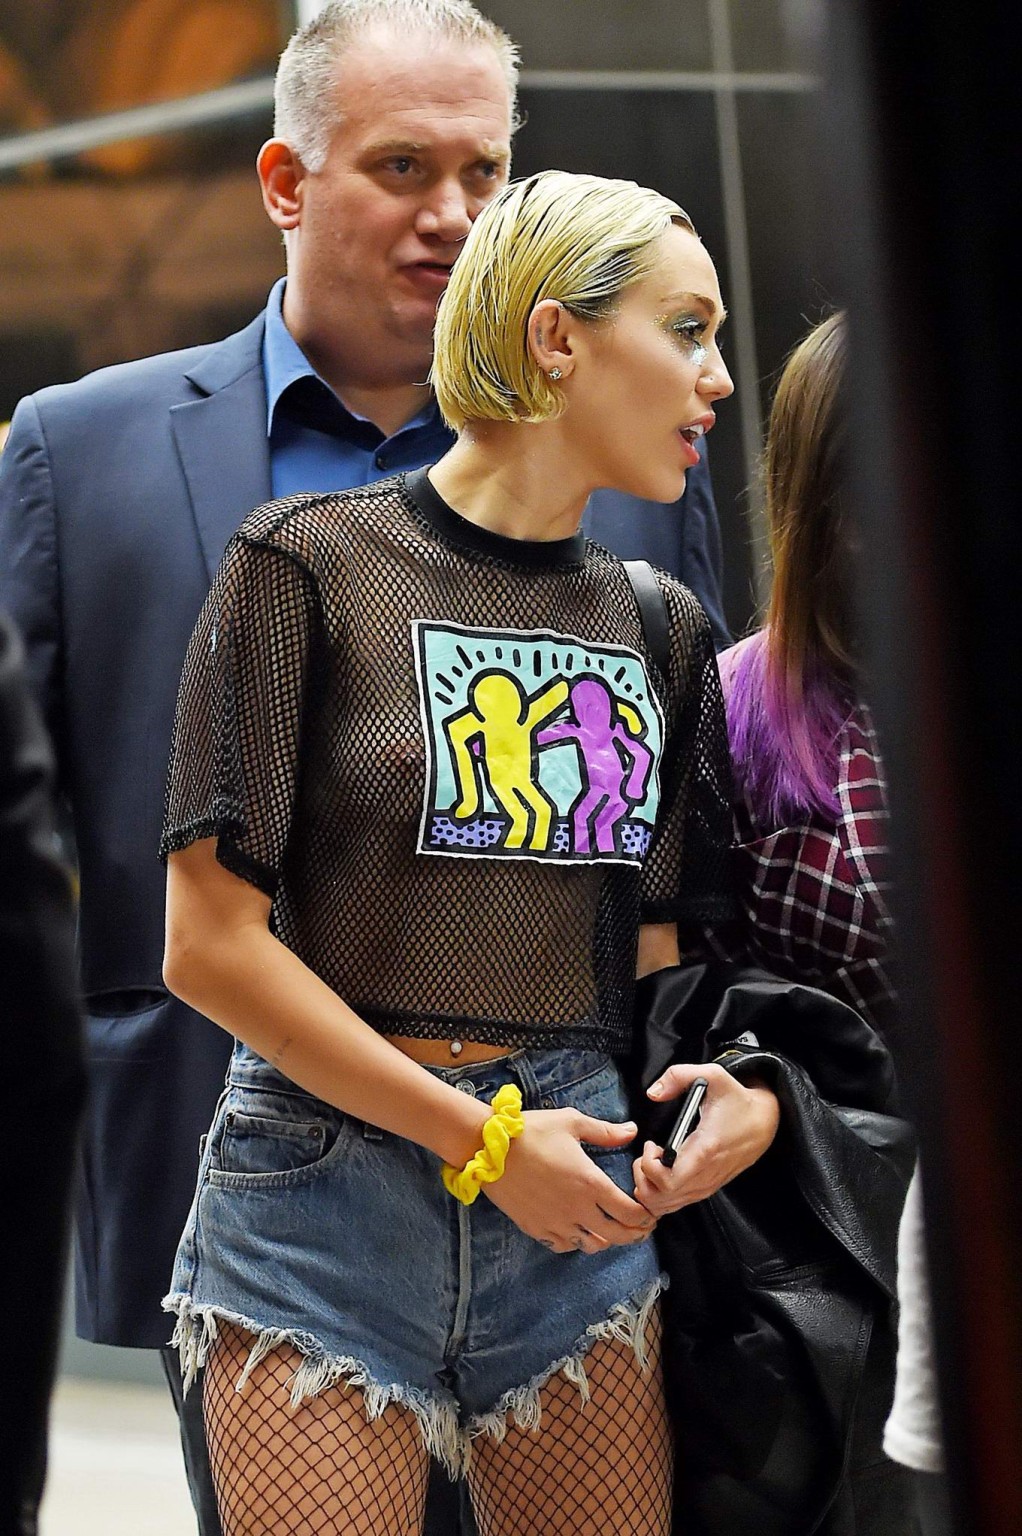 Miley Cyrus shows off her boobs wearing a mesh Tshirt out in NYC #75164282